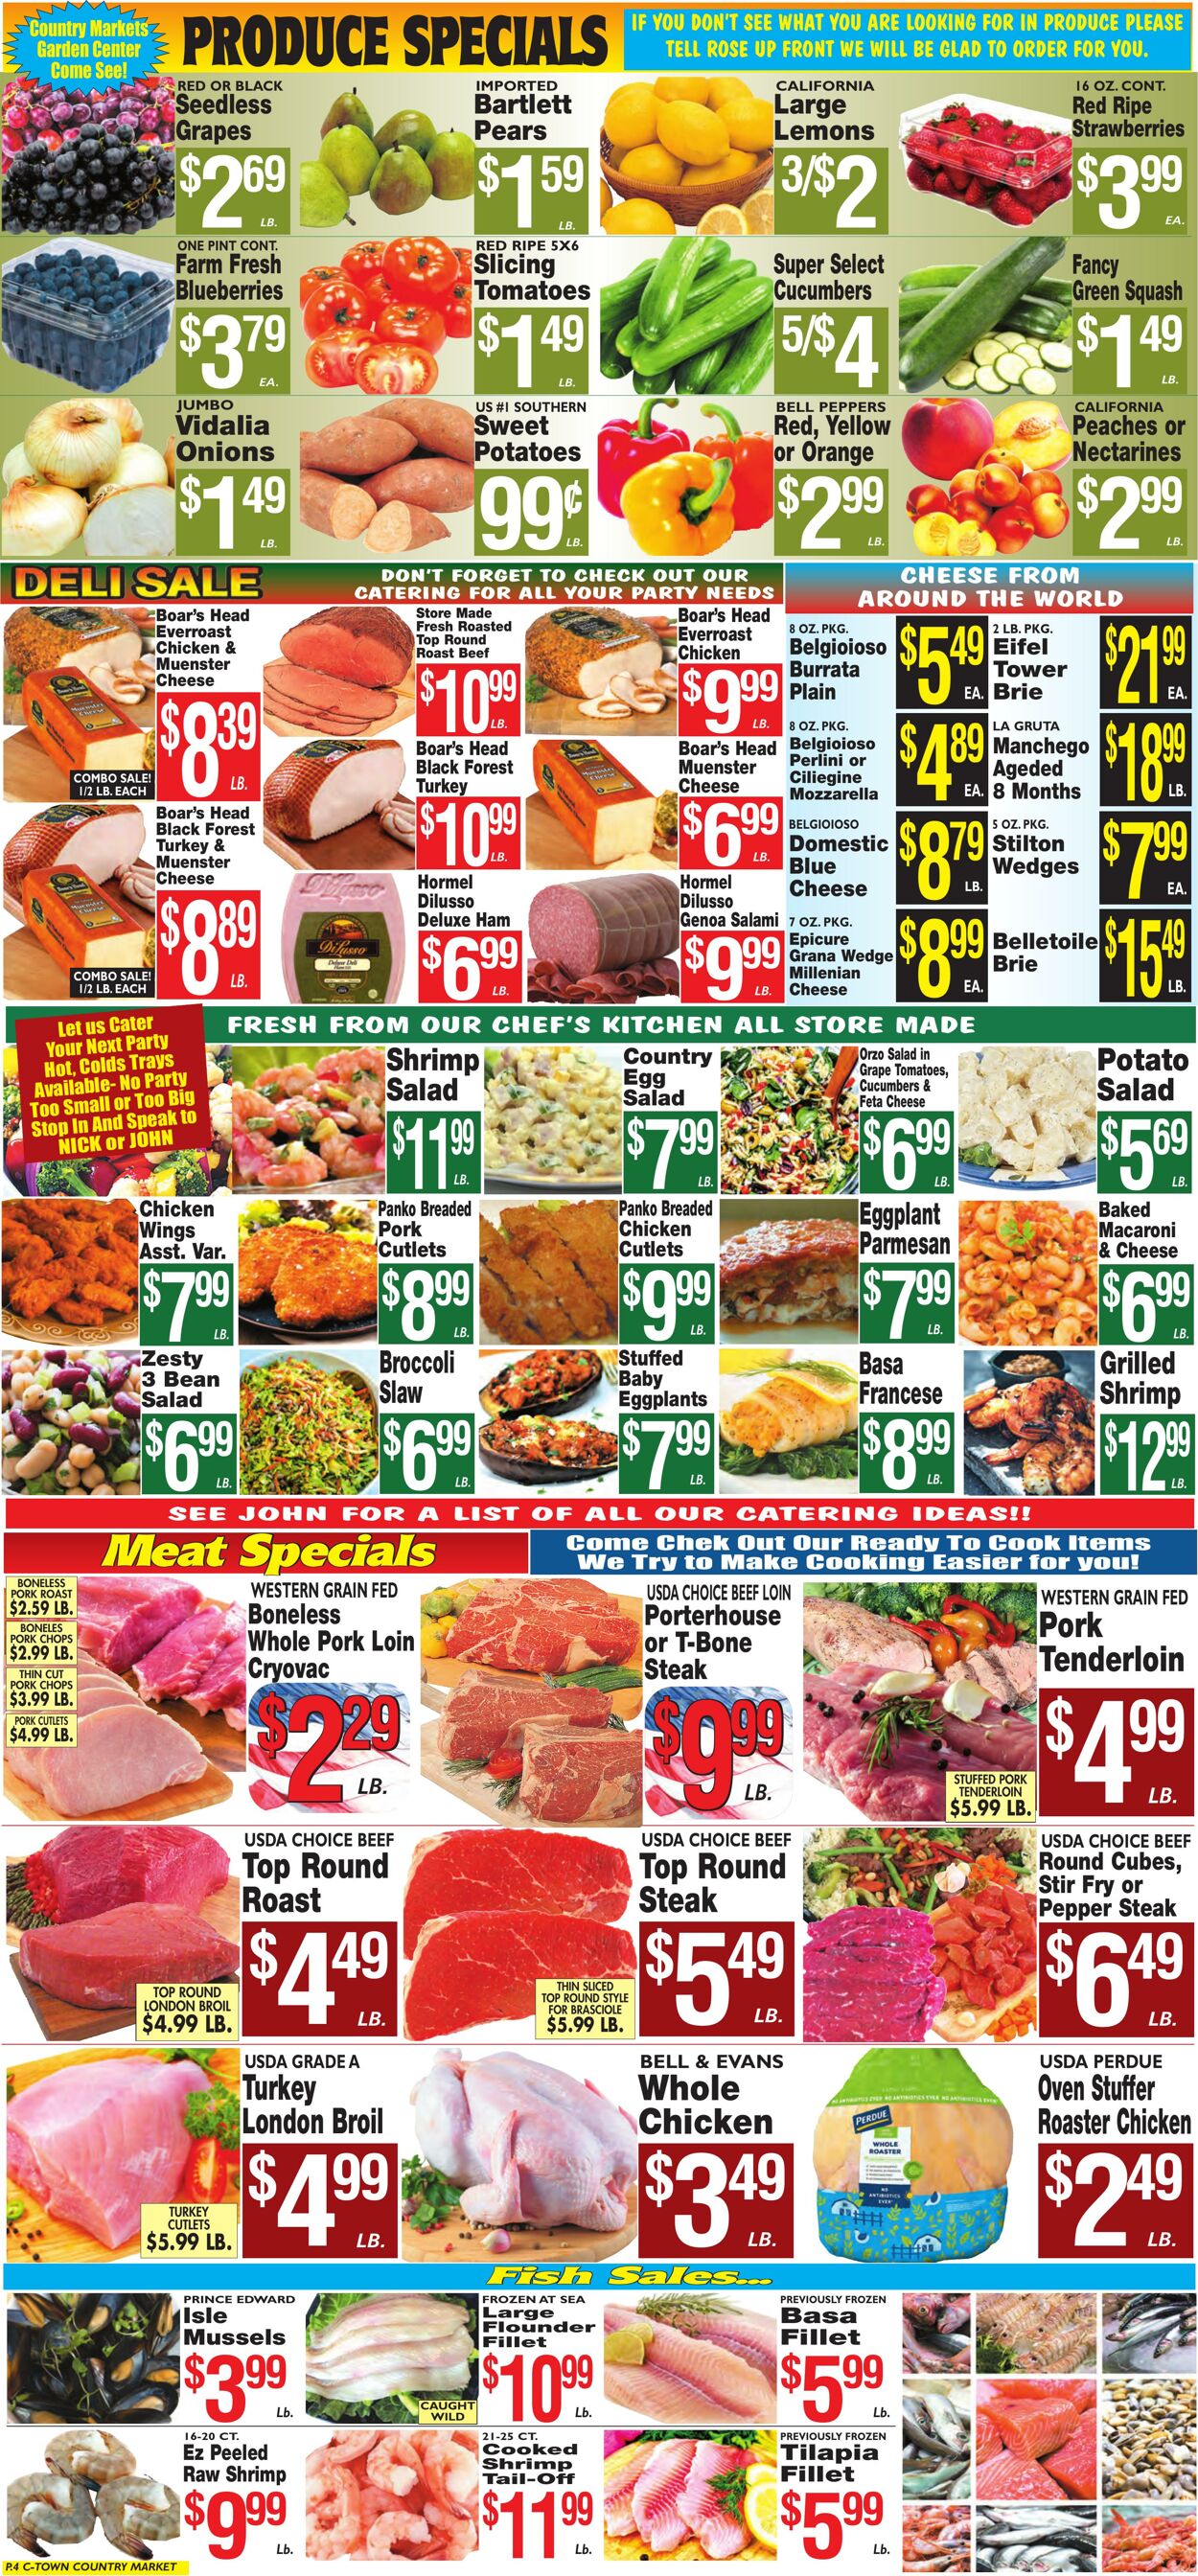 Weekly ad Country Markets of Westchester 05/20/2022 - 06/02/2022